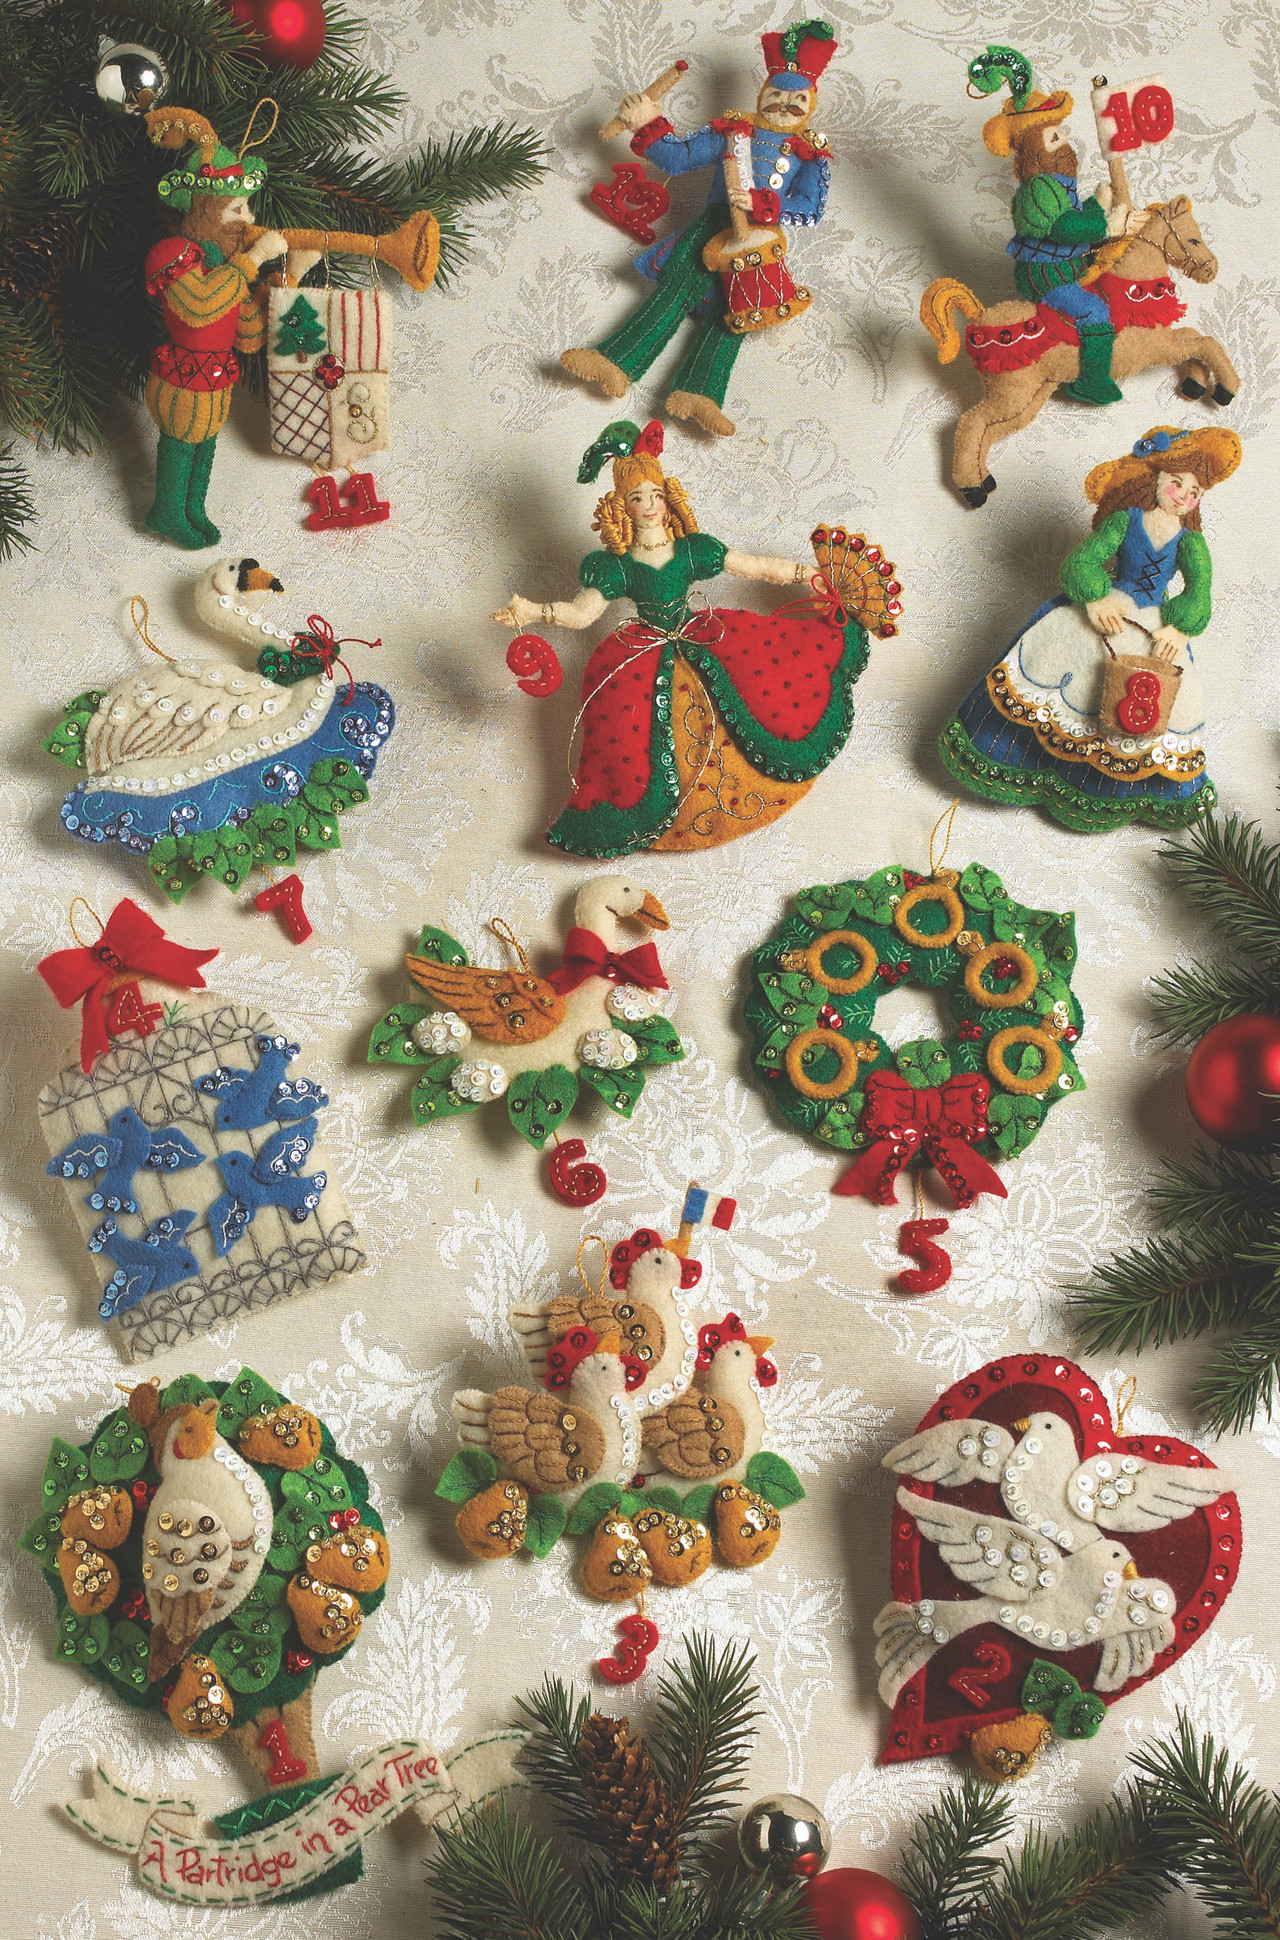 Partridge in a Pear Tree Bucilla Ornament Kit (12 days of Christmas)